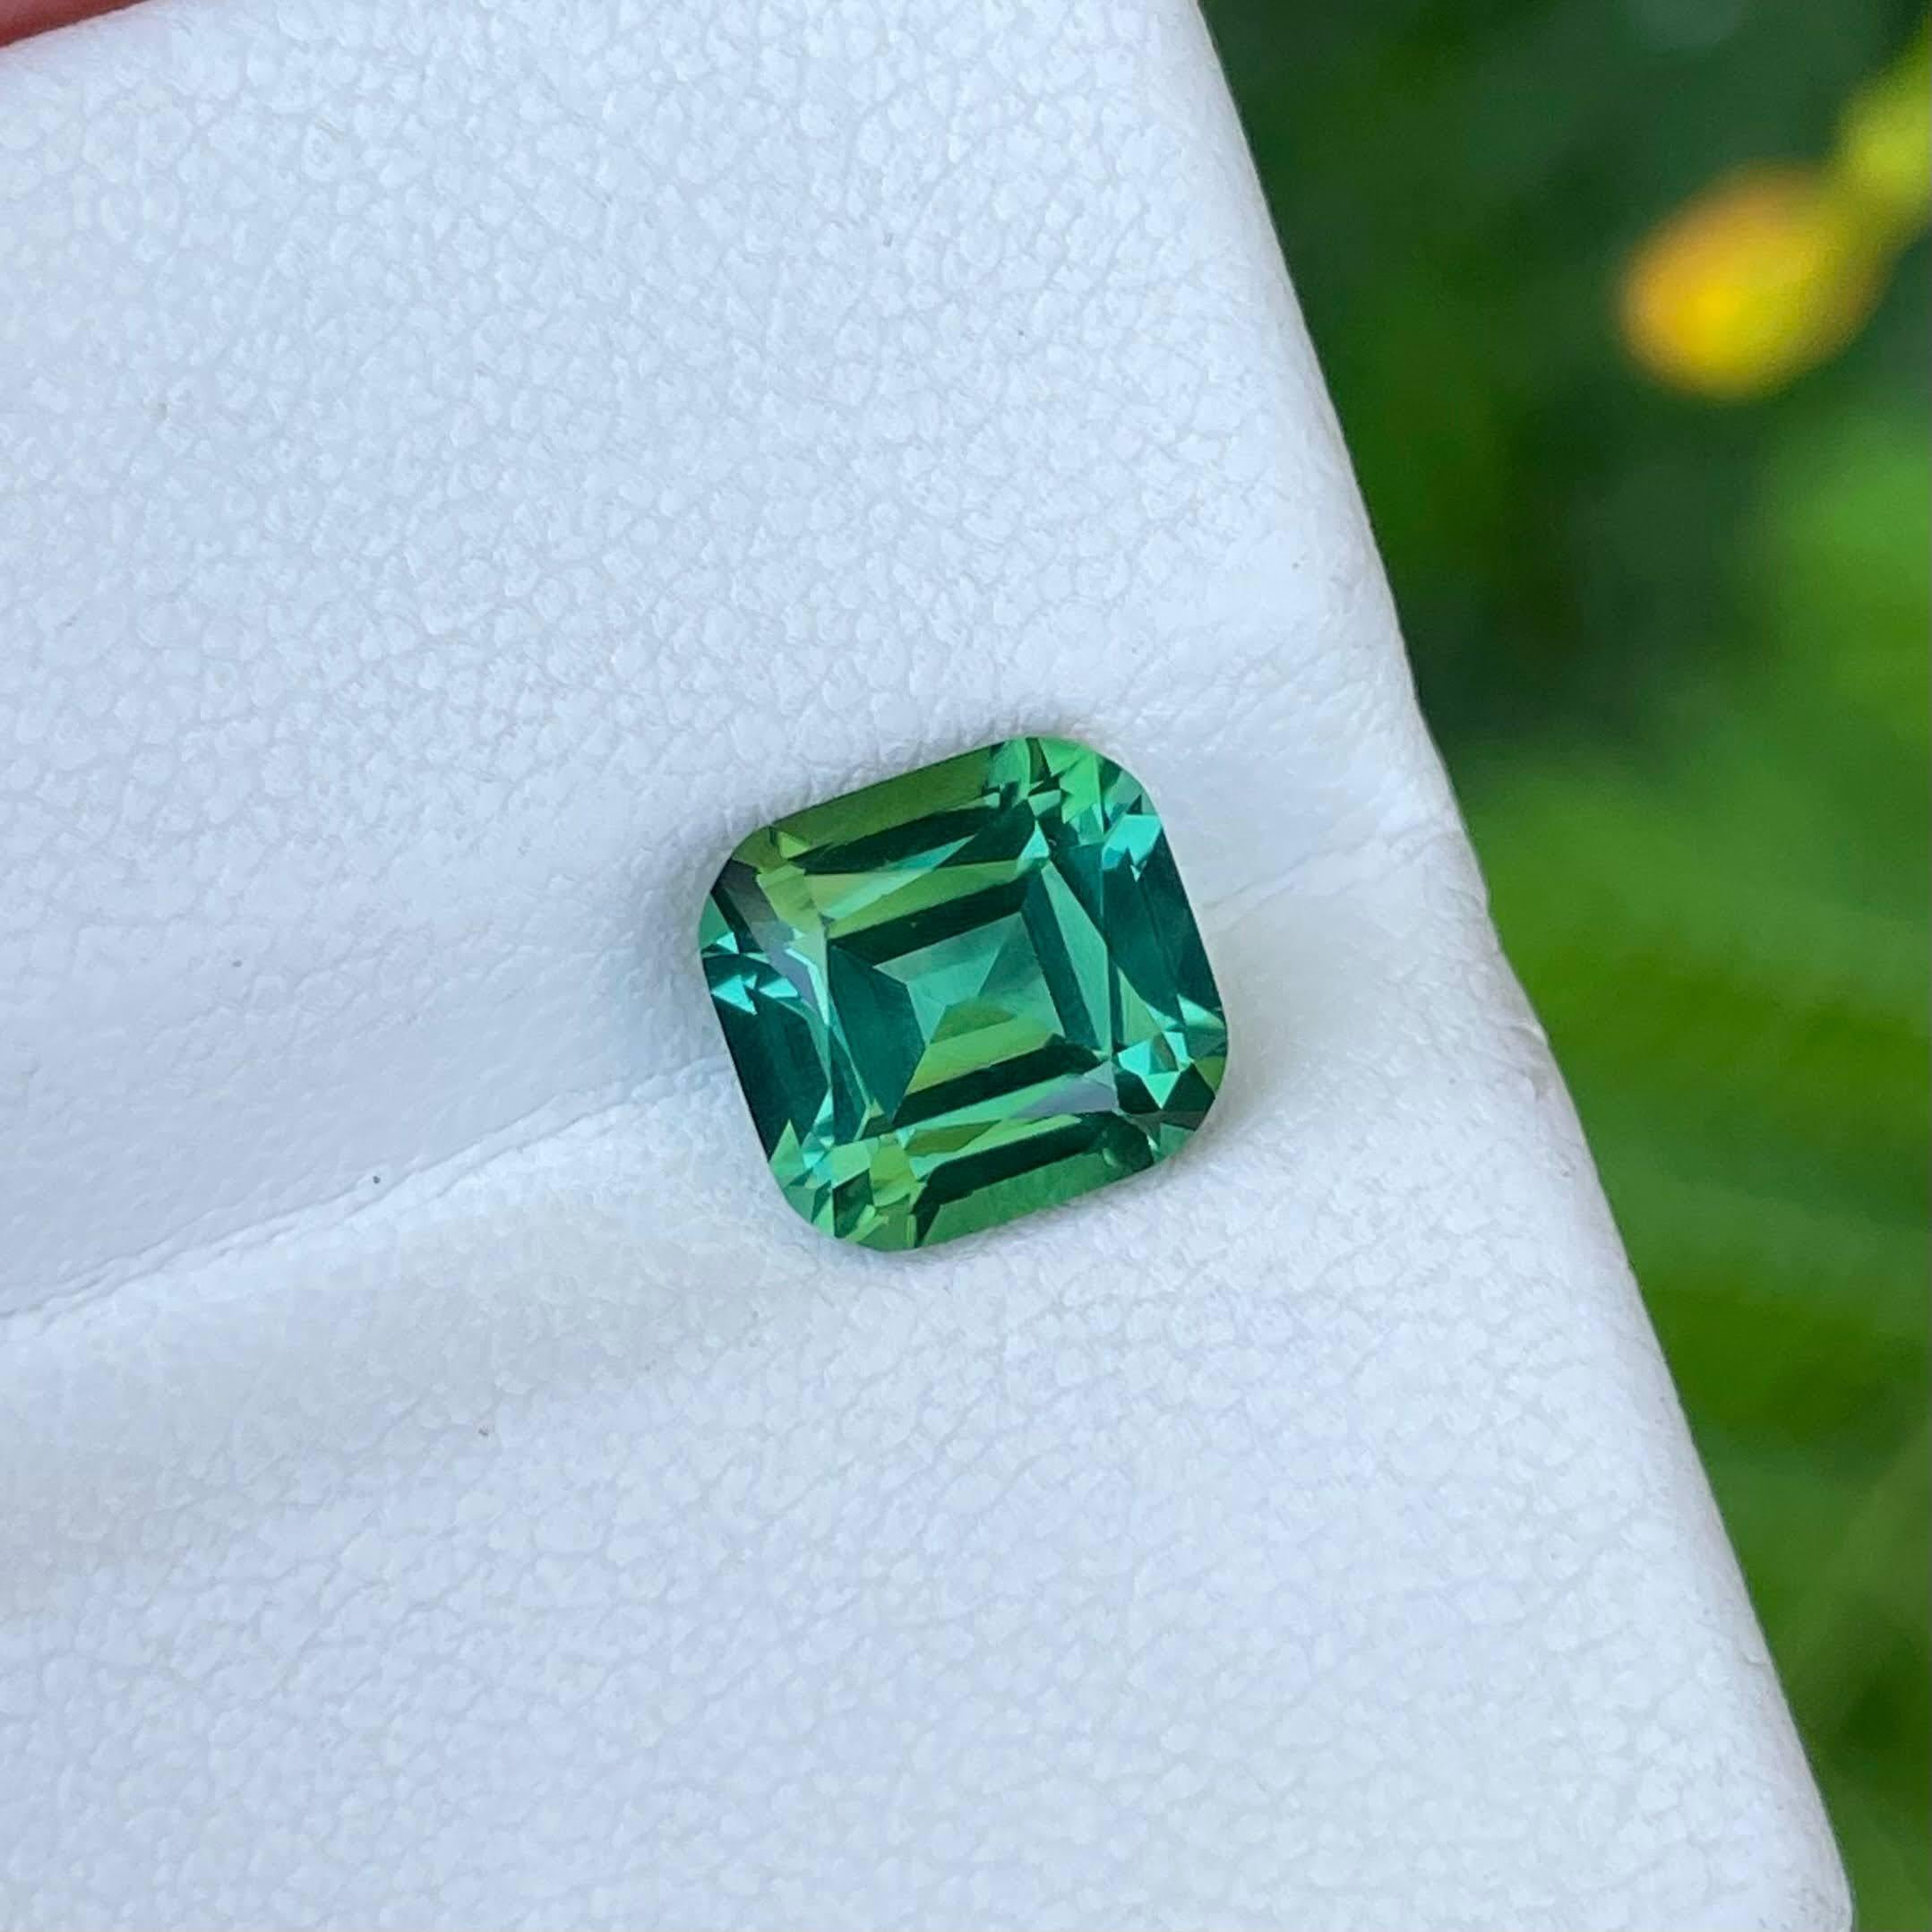 Weight 2.57 carats 
Dimensions 8.35x7.90x5.5 mm
Treatment none 
Origin Afghanistan 
Clarity VVS (Very, Very Slightly Included) 
Shape cushion 
Cut fancy cushion 




The exquisite beauty of a 2.57 carat bluish green Tourmaline Stone takes center